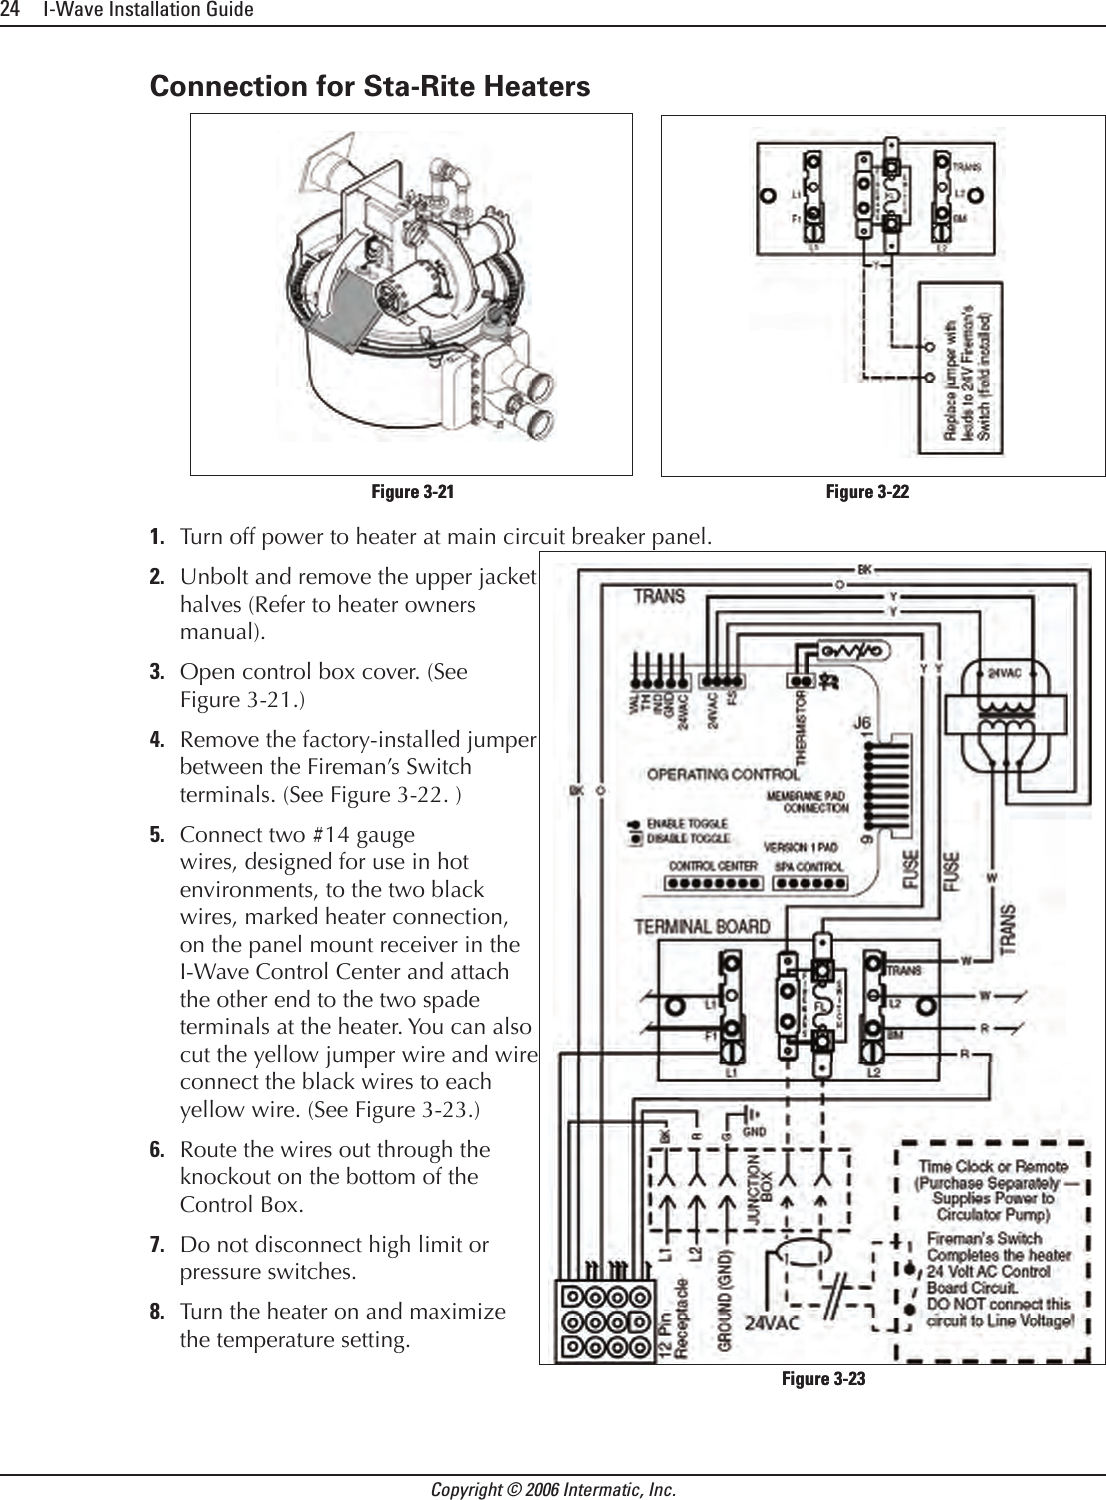 24     I-Wave Installation GuideCopyright © 2006 Intermatic, Inc.Connection for Sta-Rite HeatersTurn off power to heater at main circuit breaker panel.Unbolt and remove the upper jacket halves (Refer to heater owners manual).Open control box cover. (See Figure 3-21.)Remove the factory-installed jumper between the Fireman’s Switch terminals. (See Figure 3-22. )Connect two #14 gauge wires, designed for use in hot environments, to the two black wires, marked heater connection, on the panel mount receiver in the I-Wave Control Center and attach the other end to the two spade terminals at the heater. You can also cut the yellow jumper wire and wire connect the black wires to each yellow wire. (See Figure 3-23.)Route the wires out through the knockout on the bottom of the Control Box. Do not disconnect high limit or pressure switches.Turn the heater on and maximize the temperature setting.1.2.3.4.5.6.7.8.            Figure 3-21                   Figure 3-22            Figure 3-21                   Figure 3-22Figure 3-23Figure 3-23